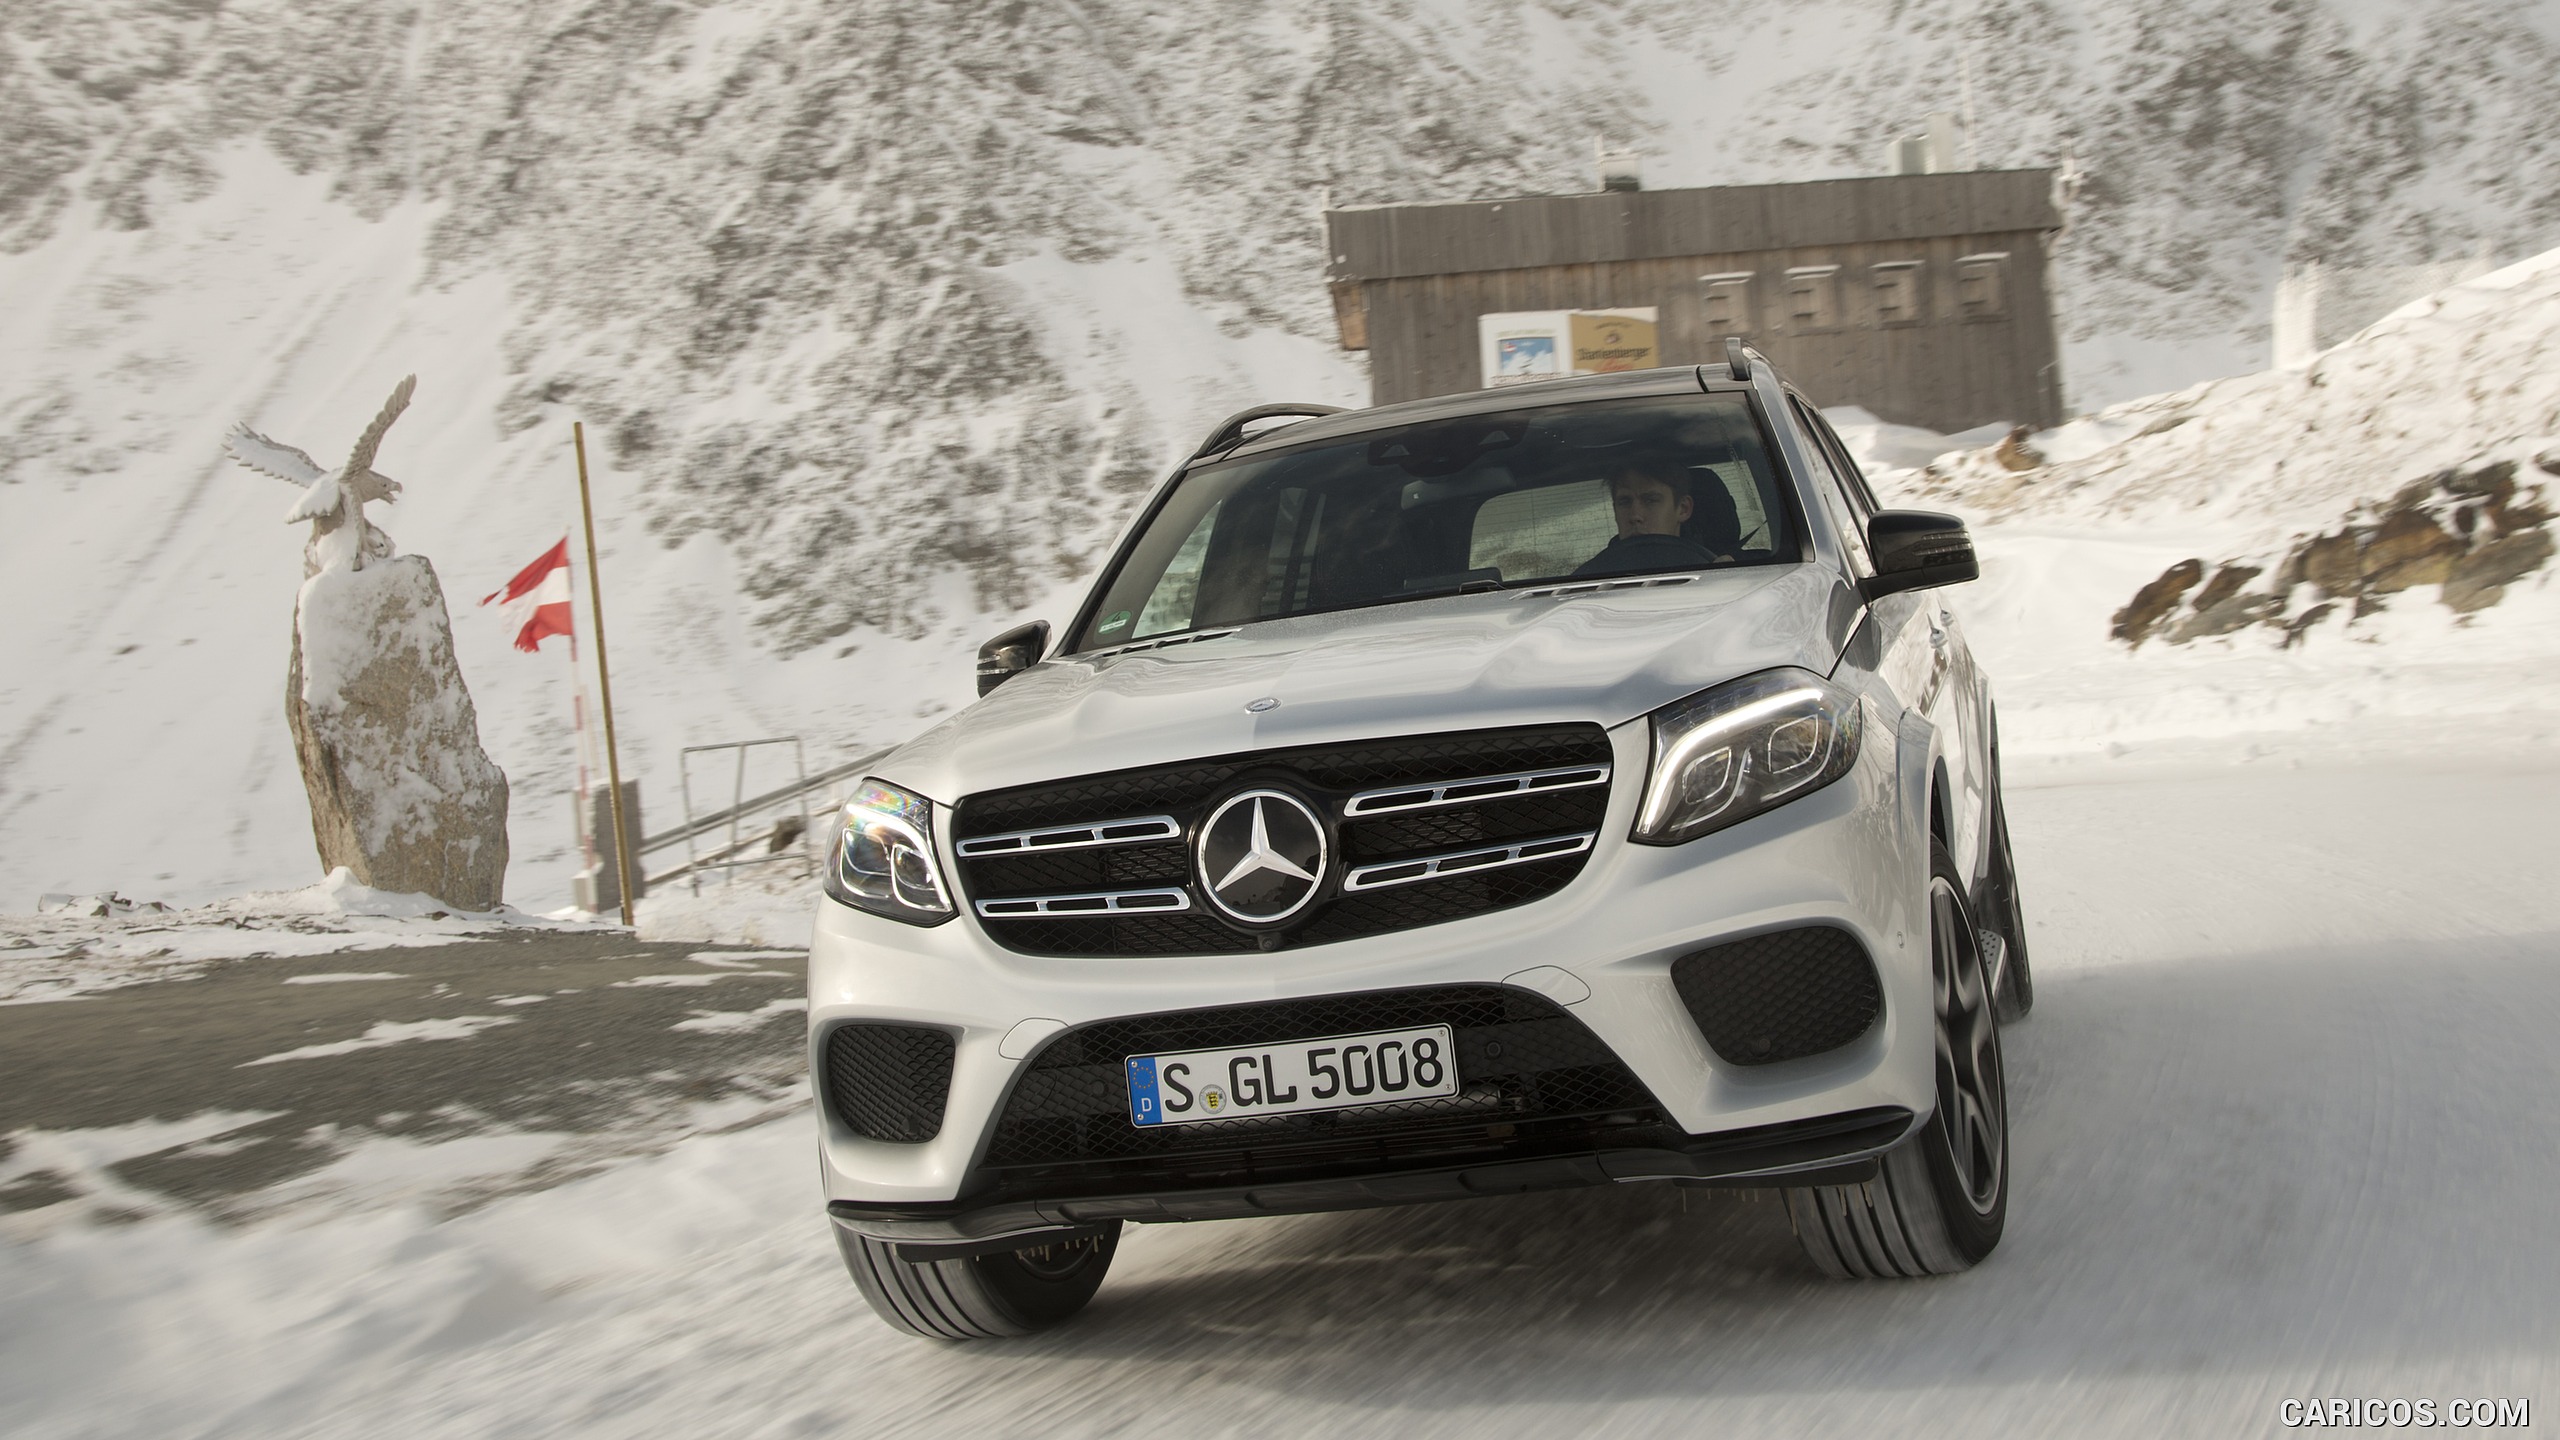 2017 Mercedes-Benz GLS 500 4MATIC AMG Line in Snow - Front, #128 of 255